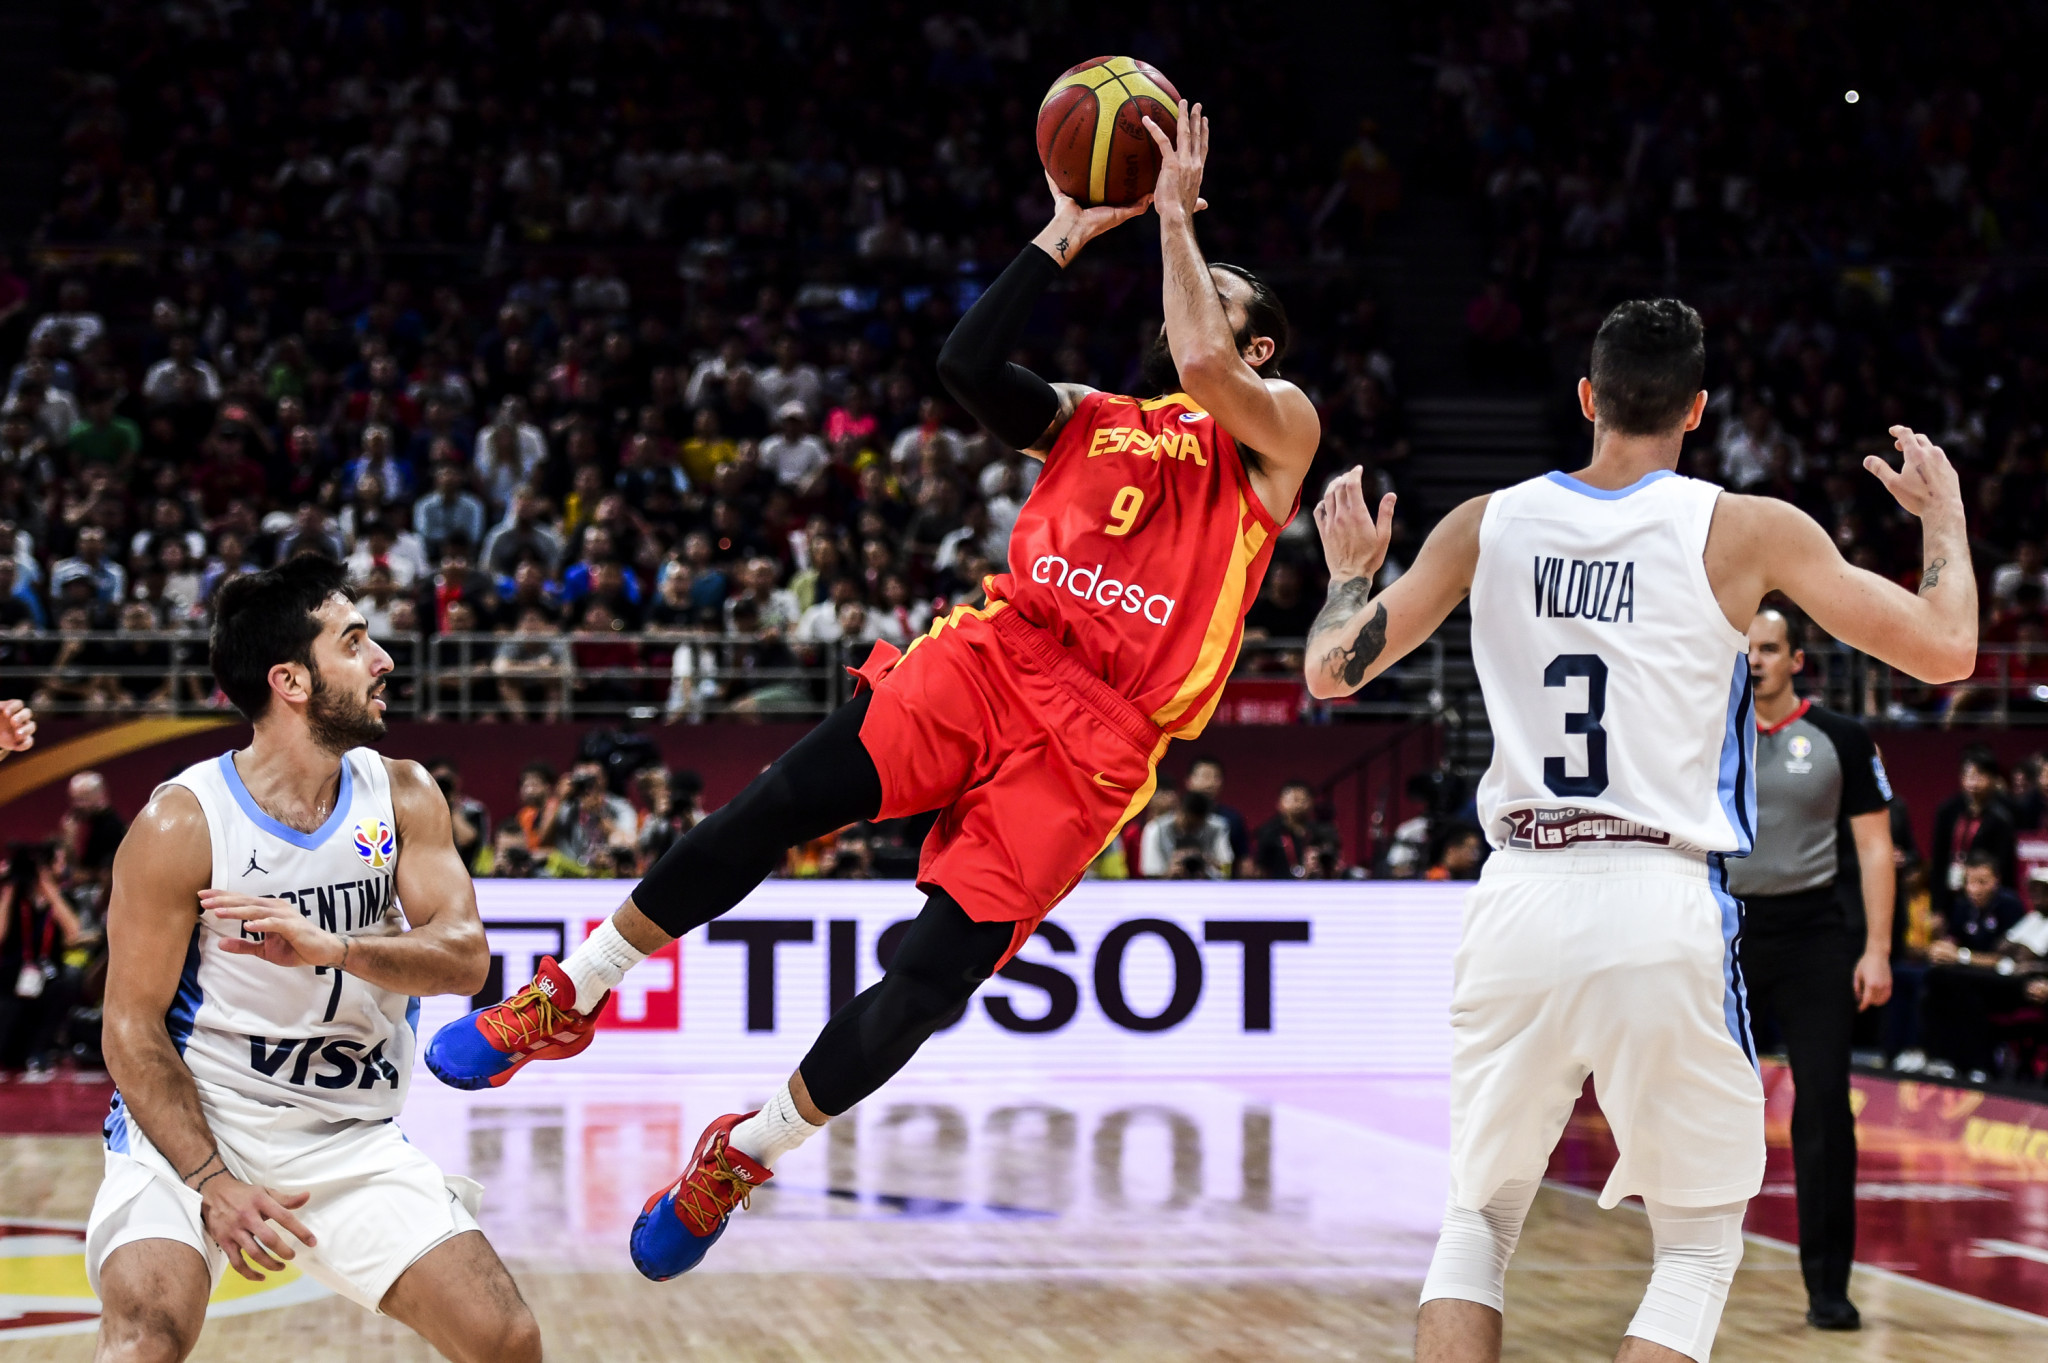 Infront said David Nivelle significantly contributed to the successful delivery of the 2019 FIBA World Cup in China ©Getty Images